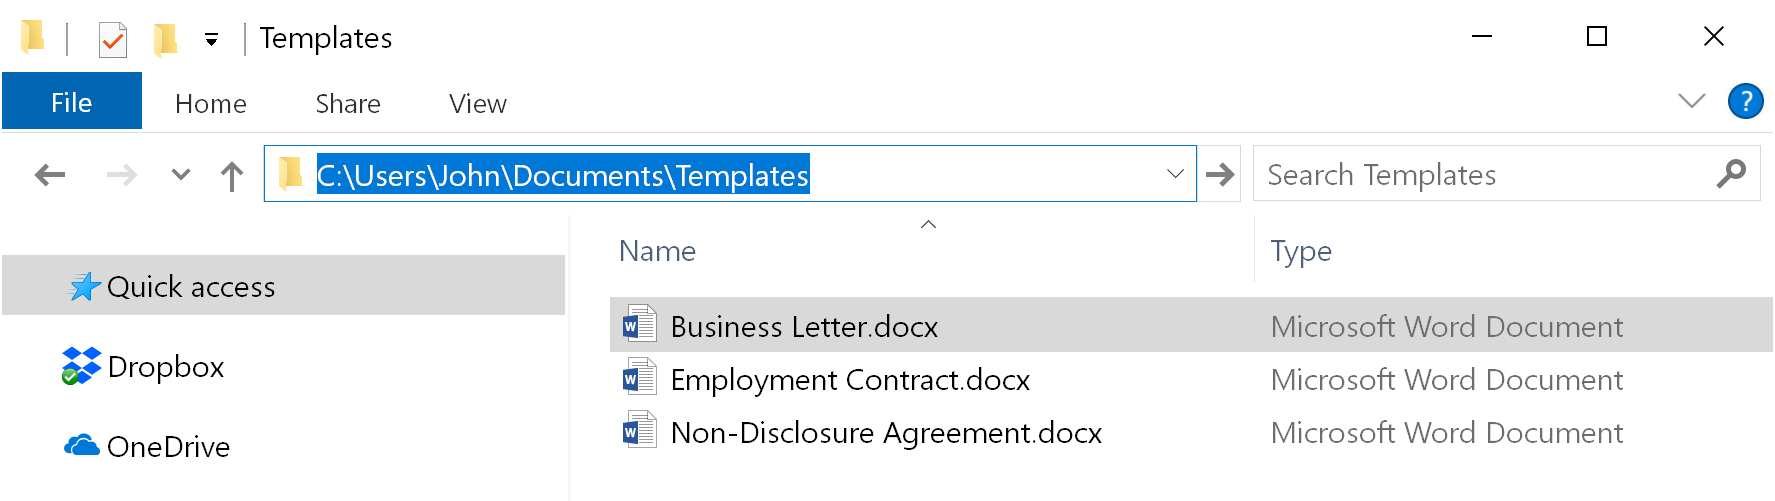 Locate the folder where you keep all your templates